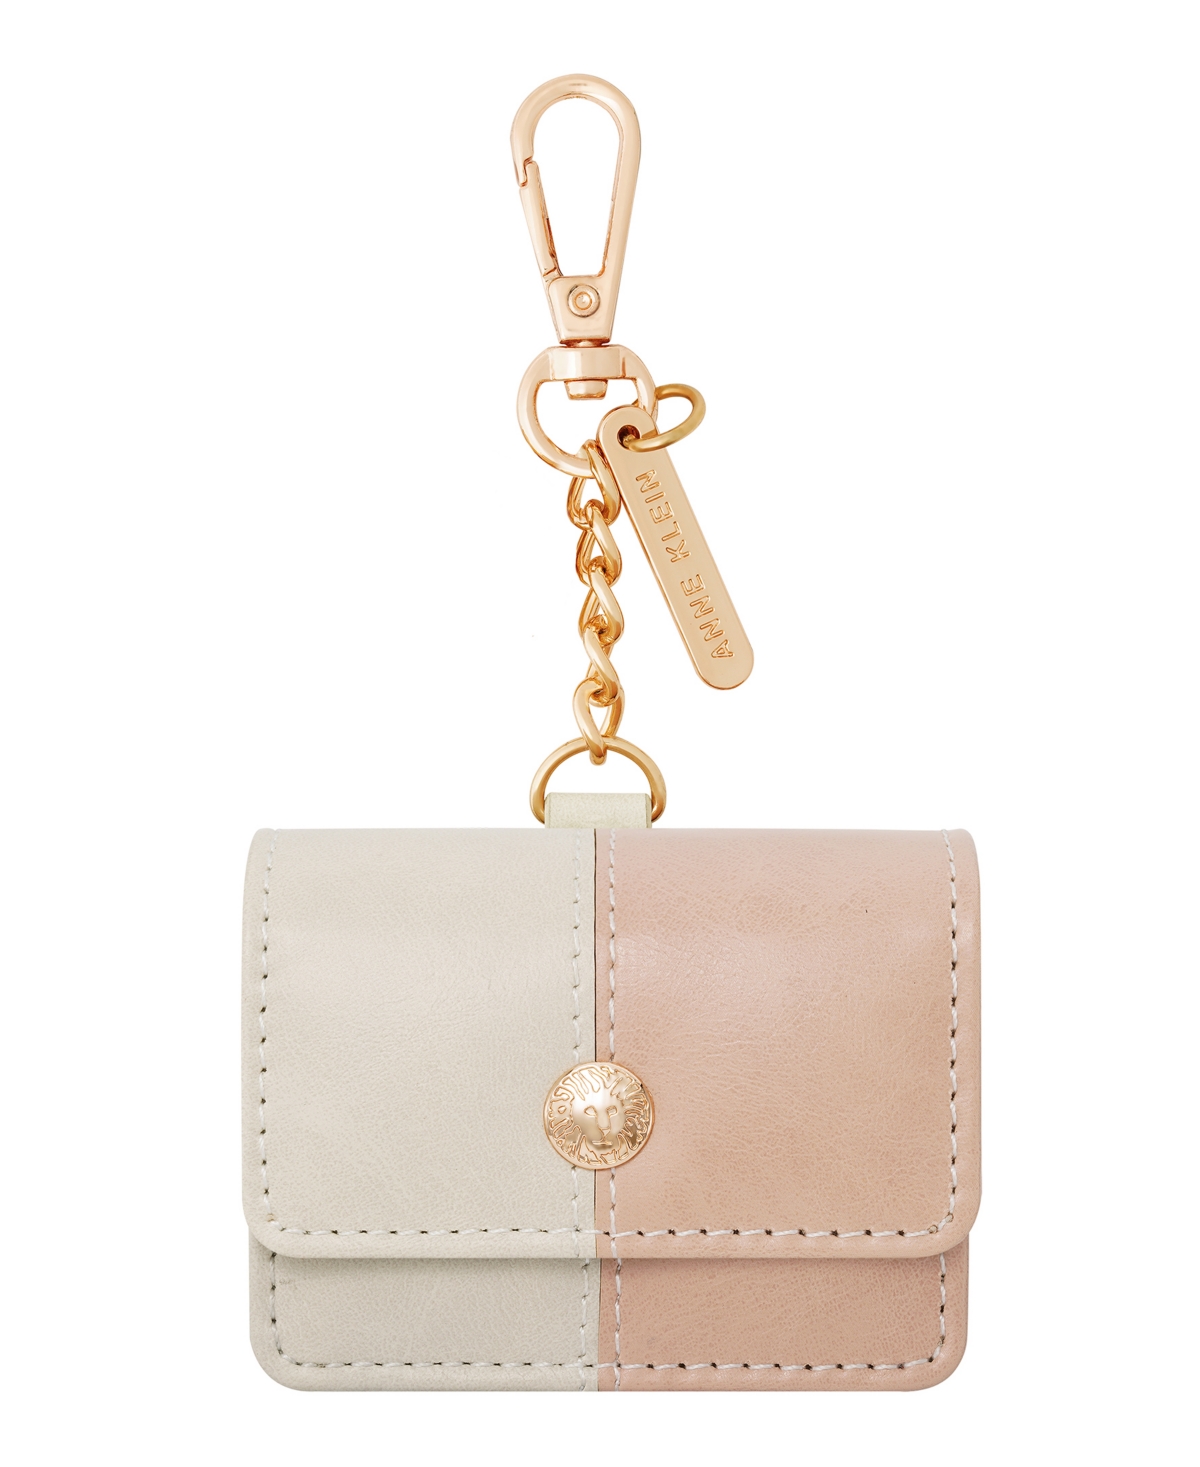 Women's Blush Pink and Beige Faux Leather Holder with Rose Gold-Tone Alloy - Blush Pink, Beige